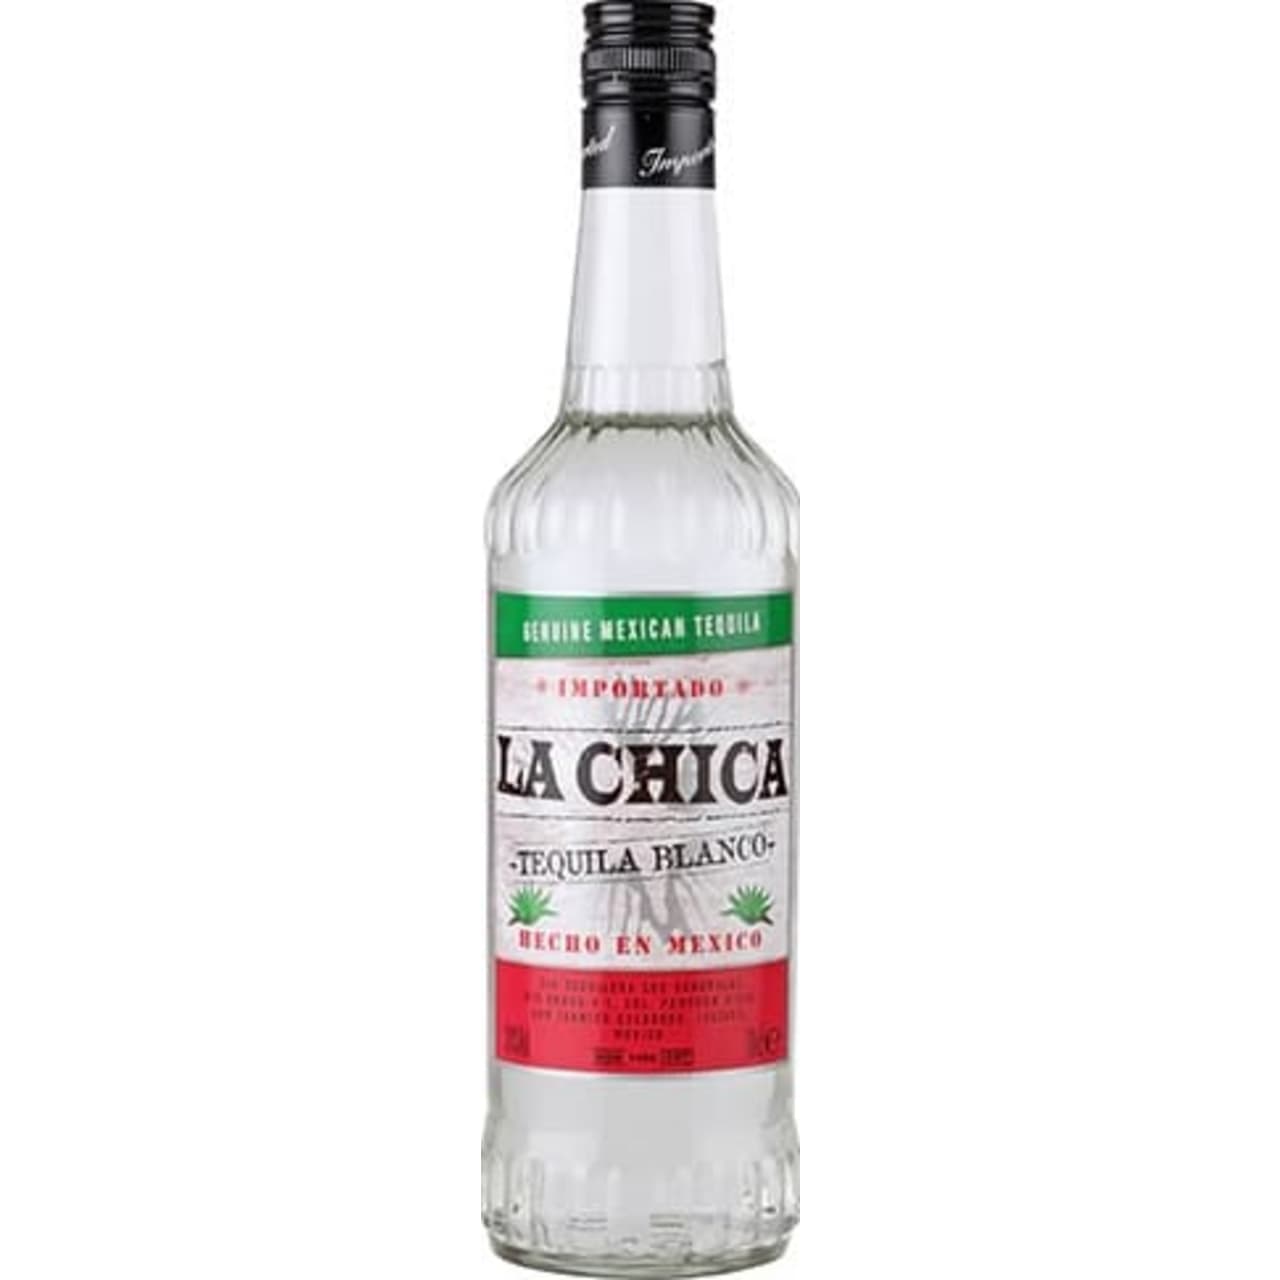 A wonderful product of Mexico, La Chicha tequila silver is a young, unaged edition. Unbarrelled, this crisp clear tequila is produced traditionally from distilled cactus juice.